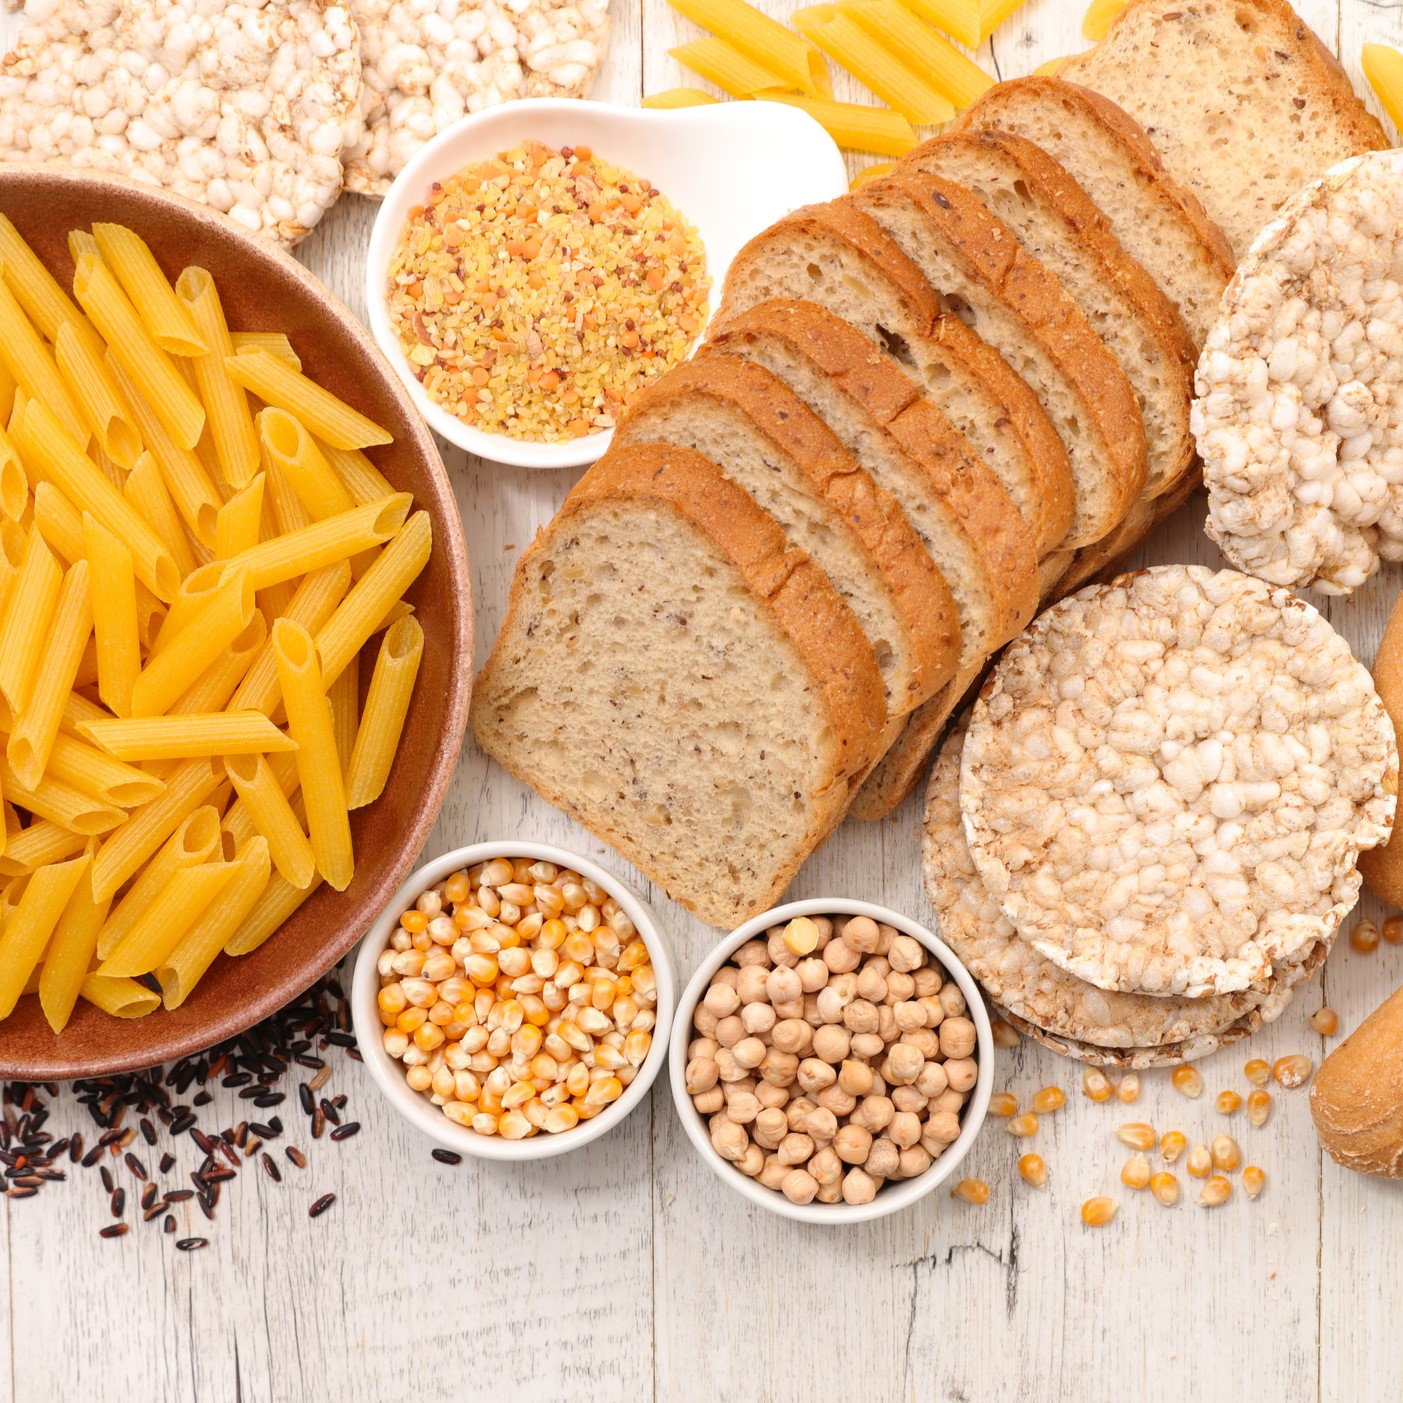 Products containing gluten on wooden table, including pasta, bread, and rice cakes.